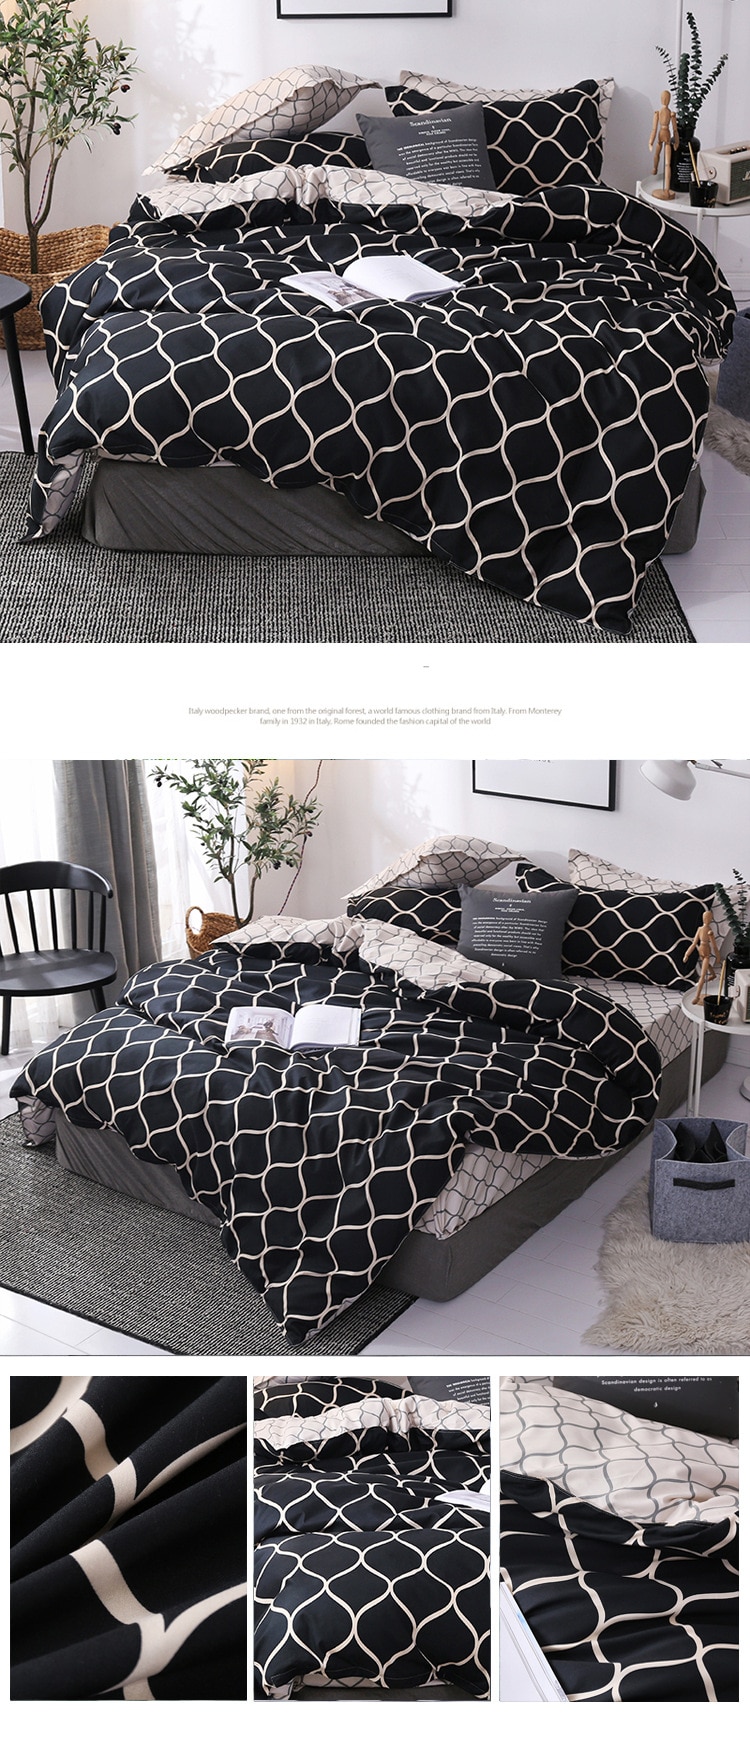 Simple Bedclothes Quilt Cover Pillowcase Three-Piece Bedding Set With Pillow Case Single Double Comforter Black Duvet Cover